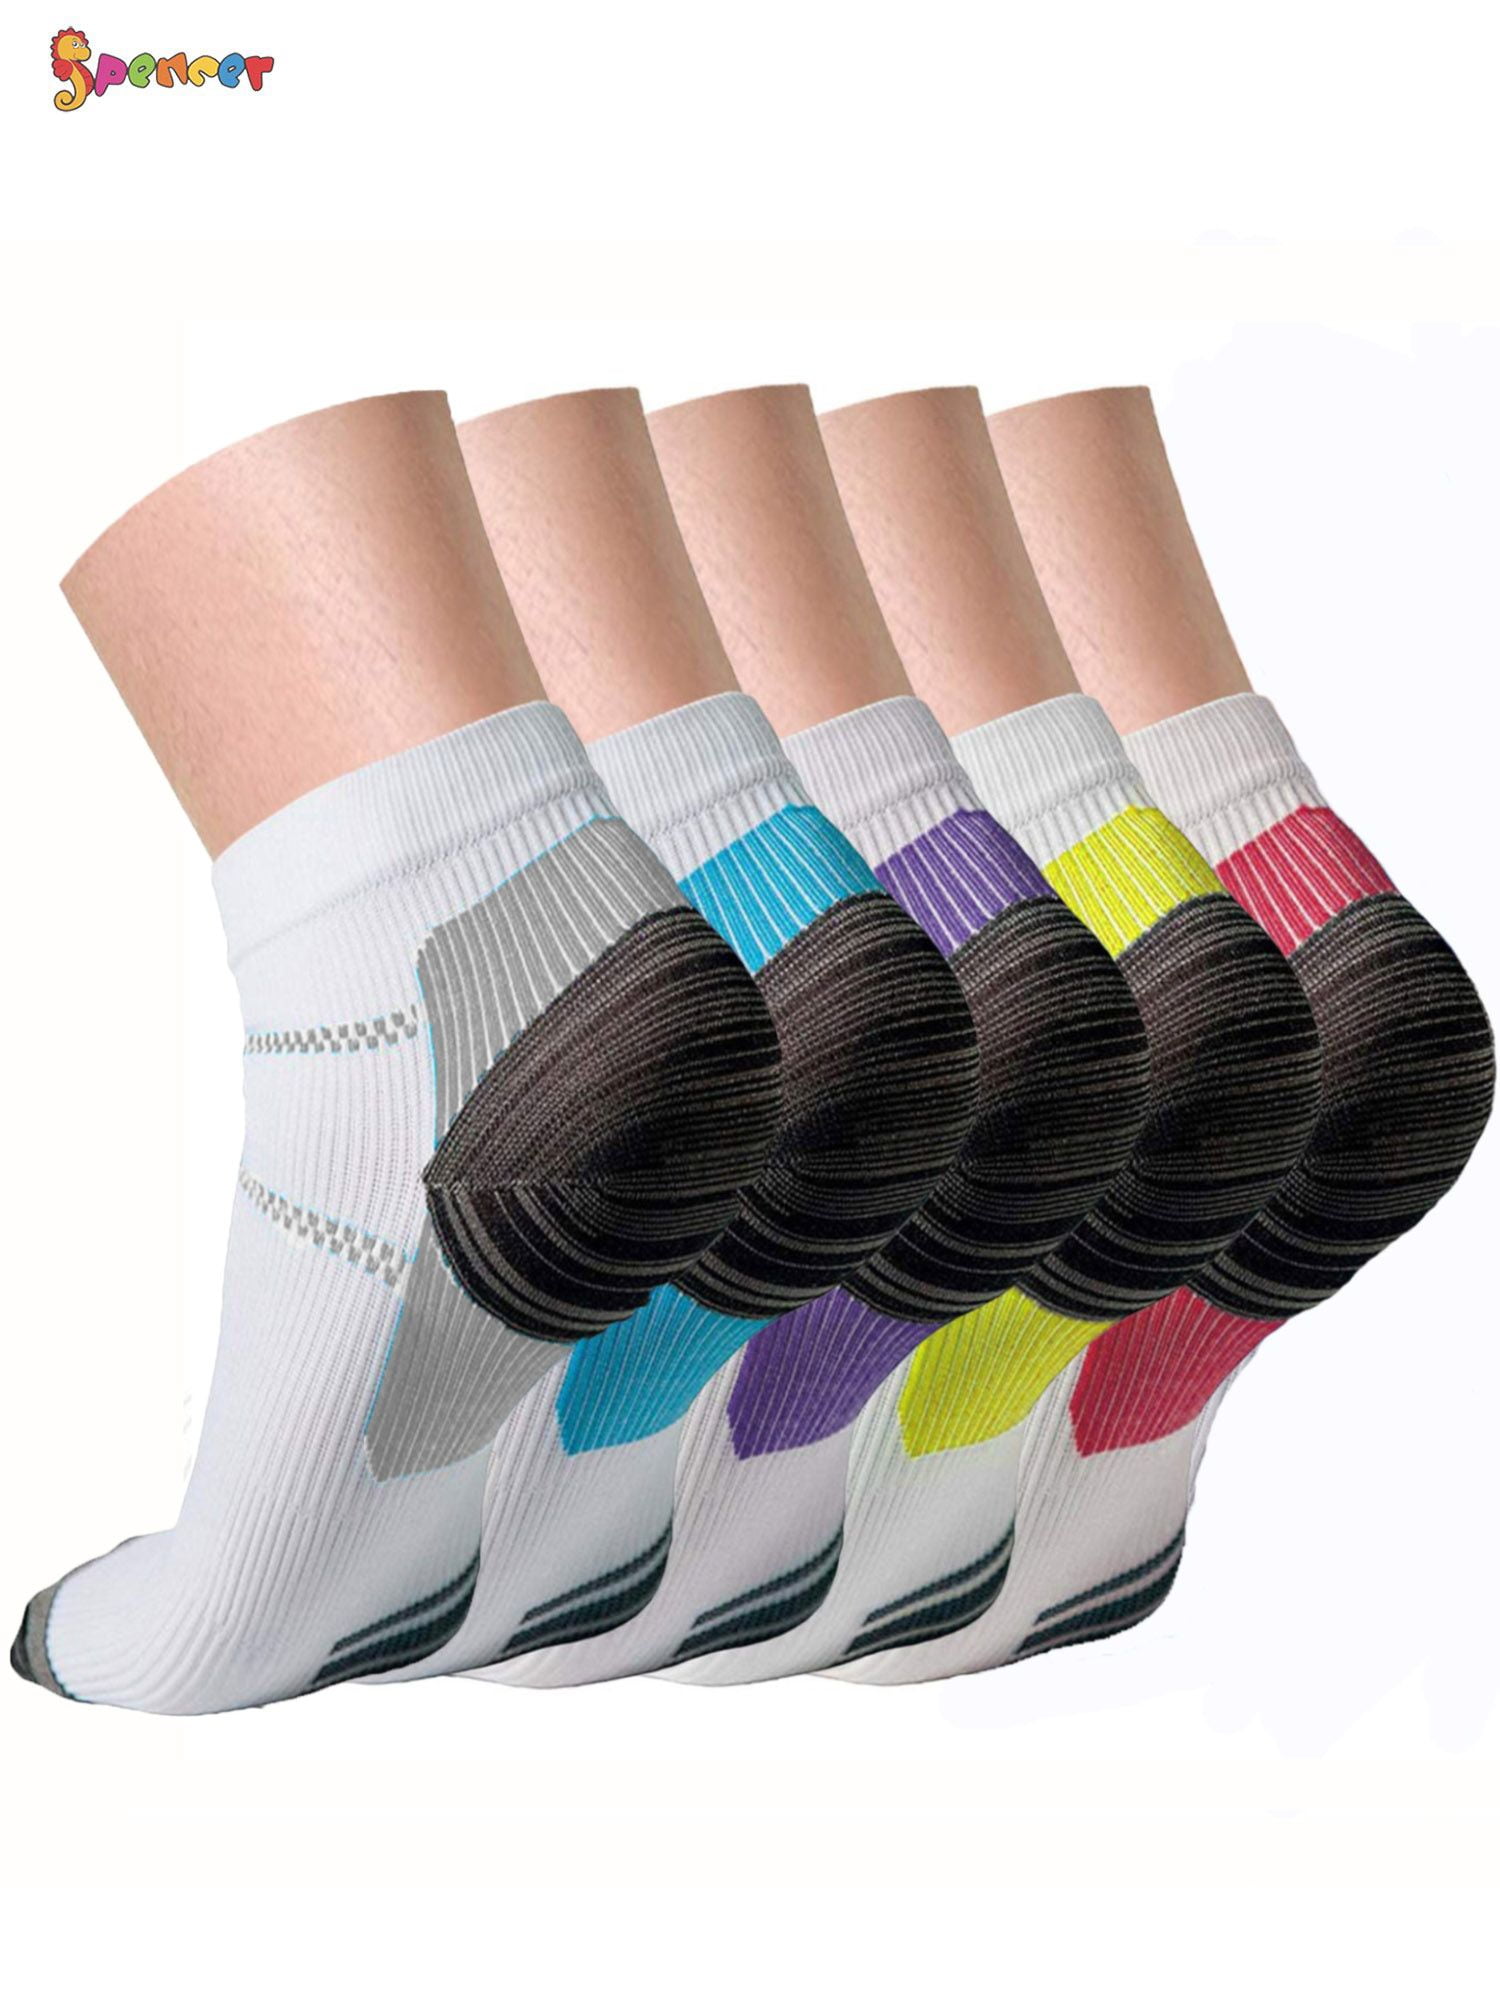 5 Pairs Men's Performance Athletic Ankle Running Socks Soft Cotton Socks Casual 